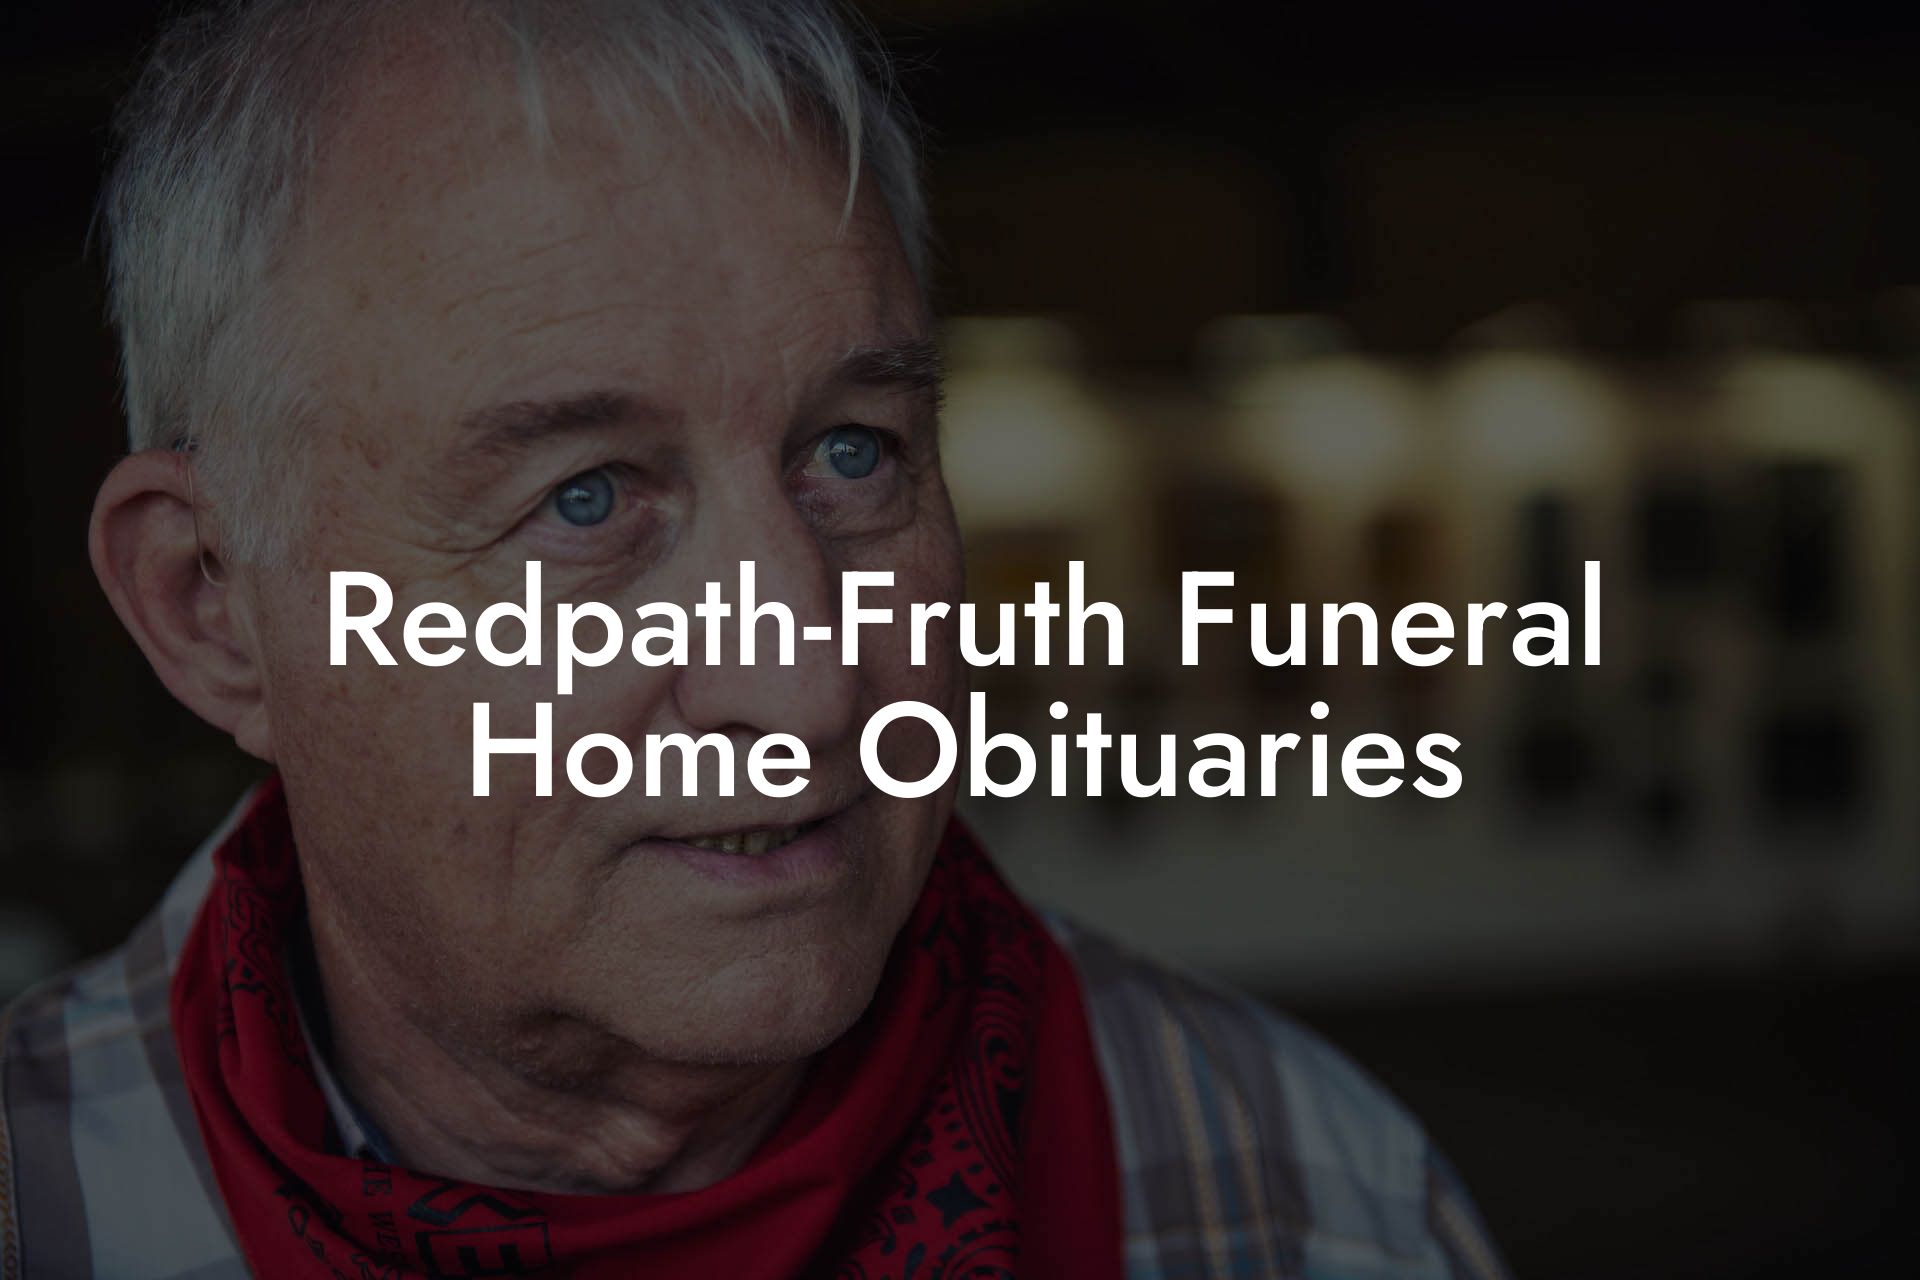 Redpath-Fruth Funeral Home Obituaries